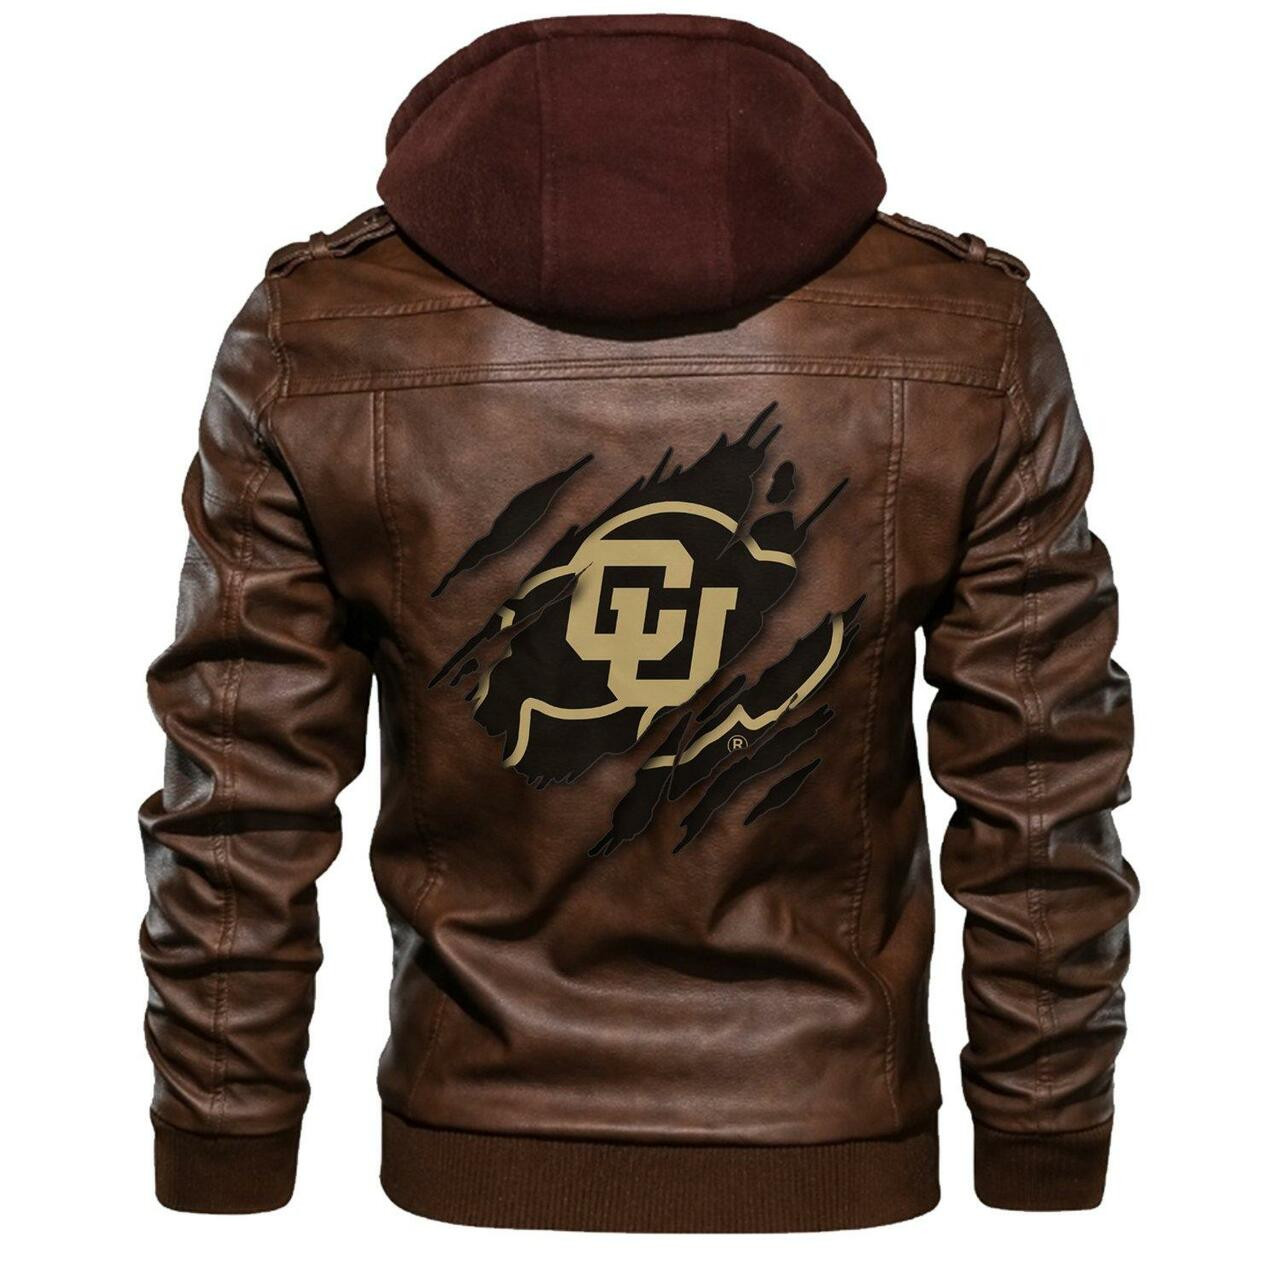 Nice leather jacket For you 149